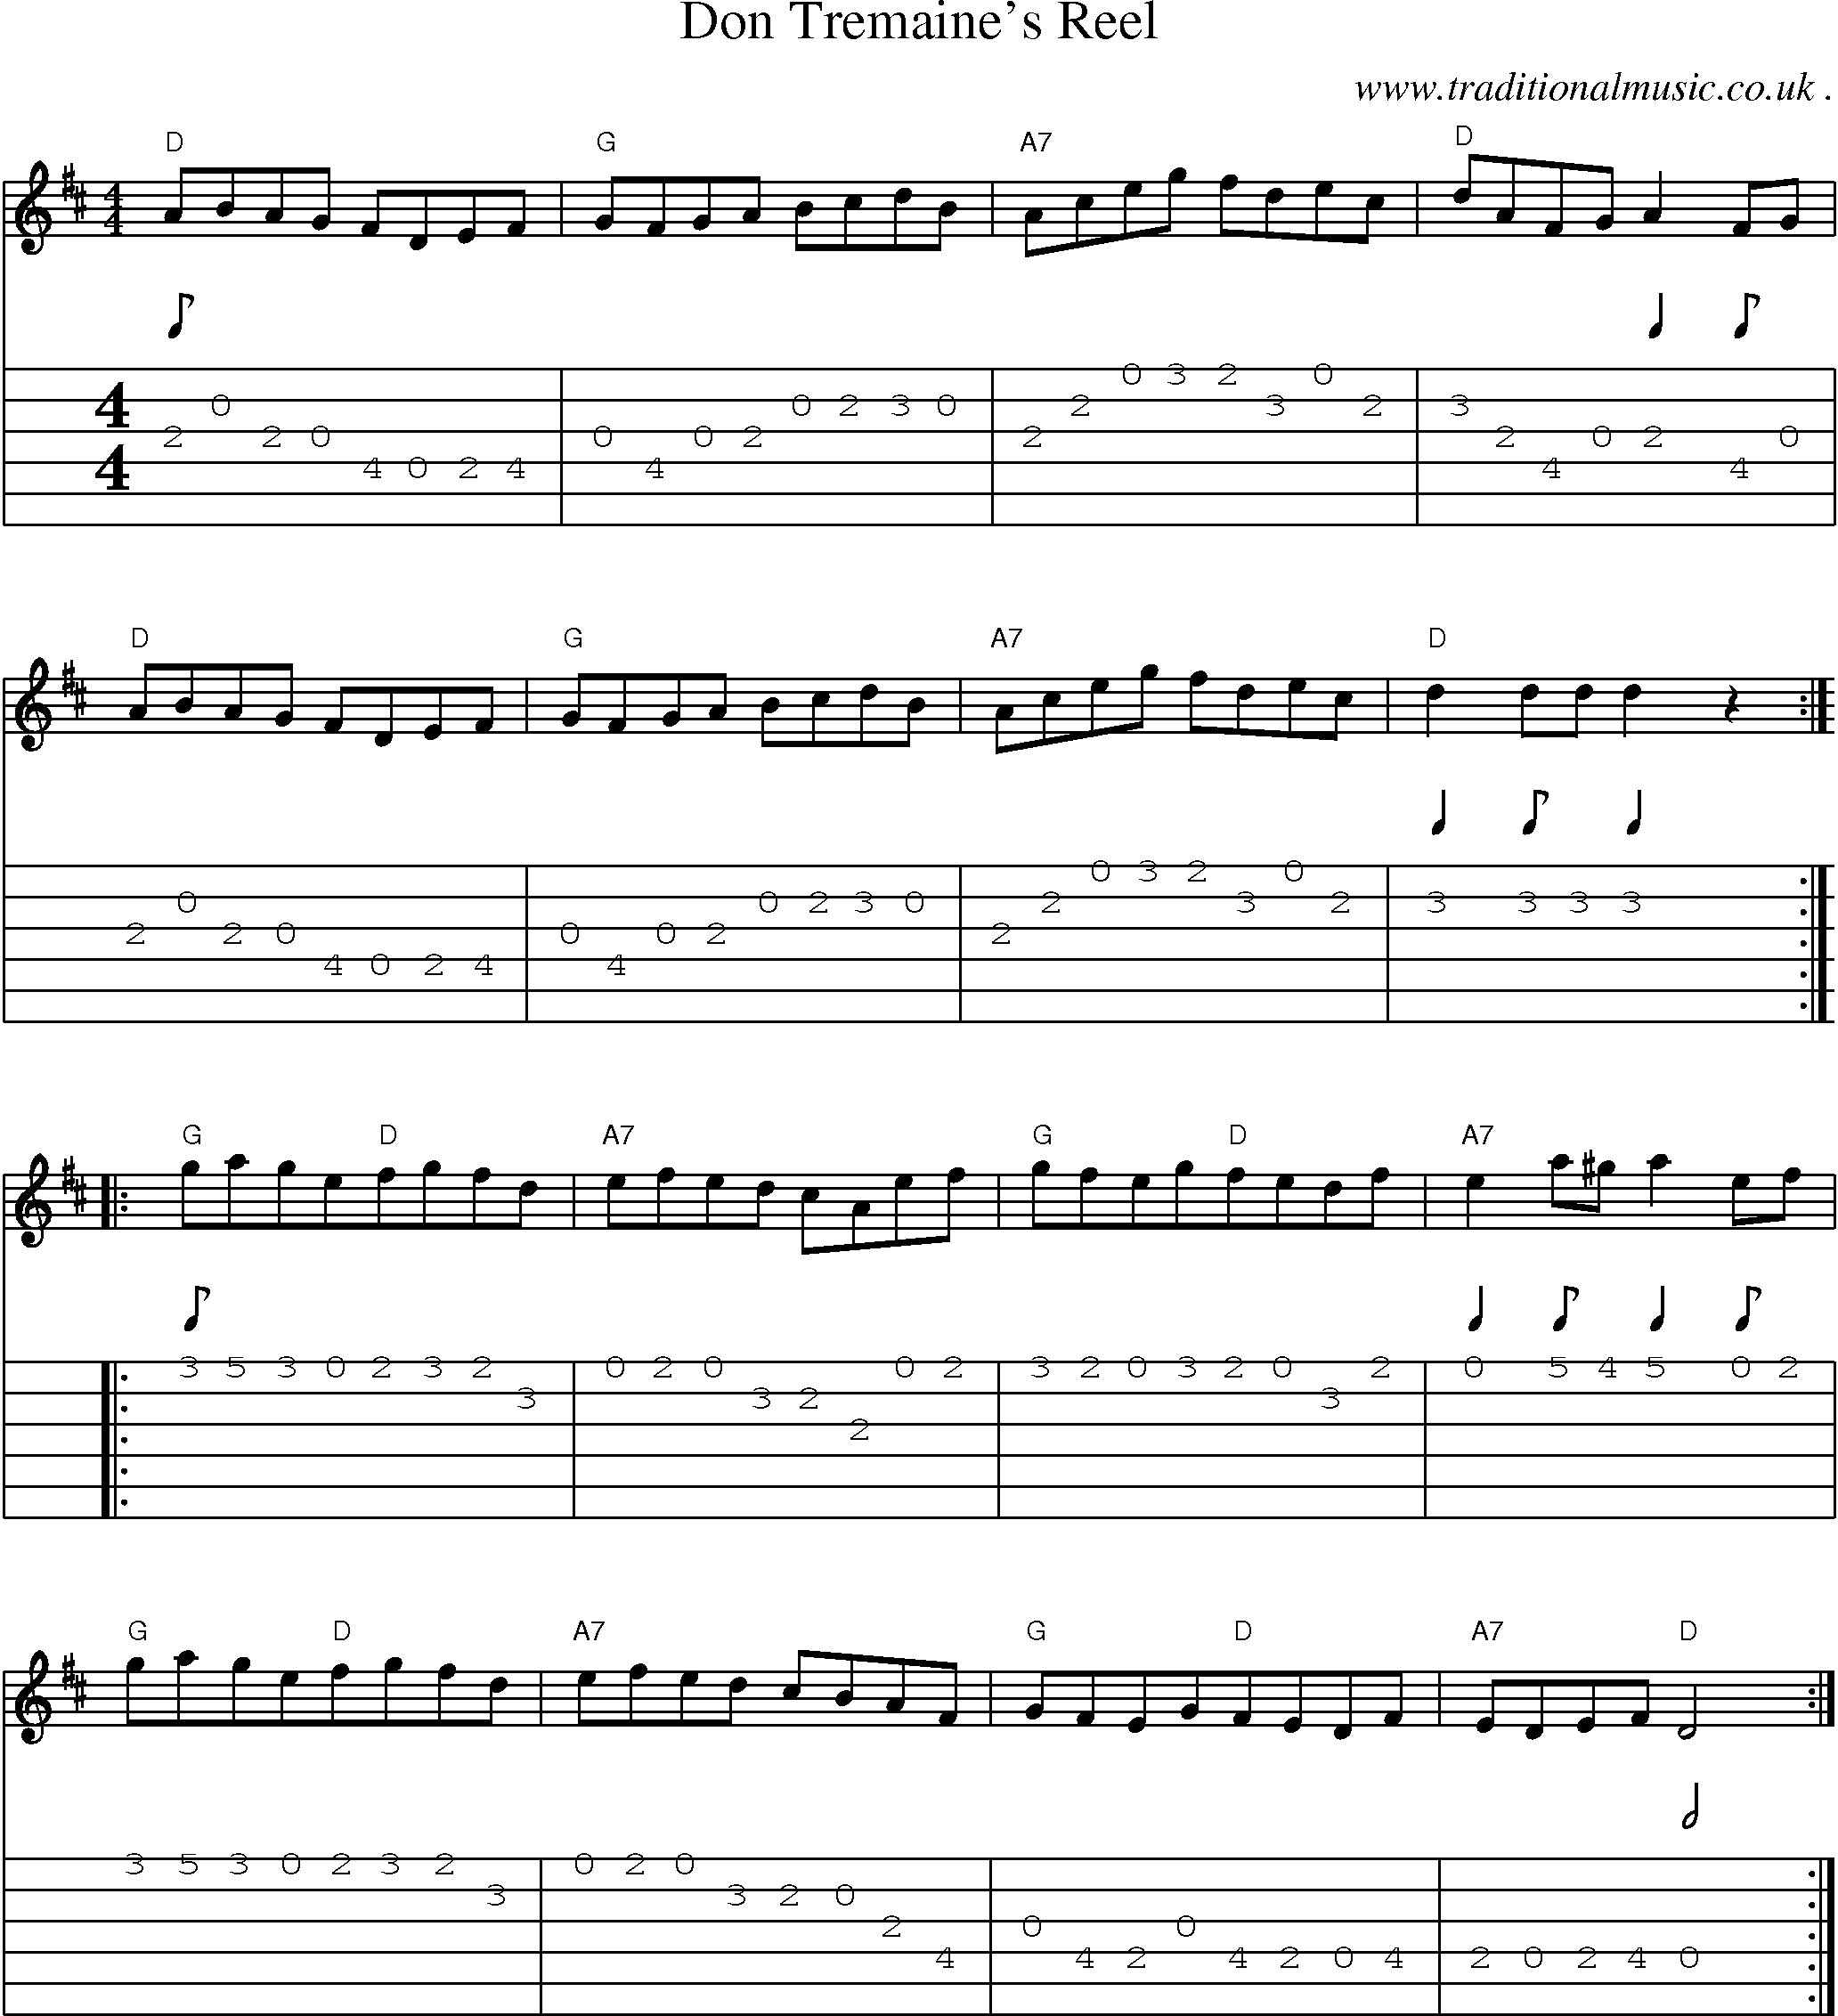 Sheet-Music and Guitar Tabs for Don Tremaines Reel